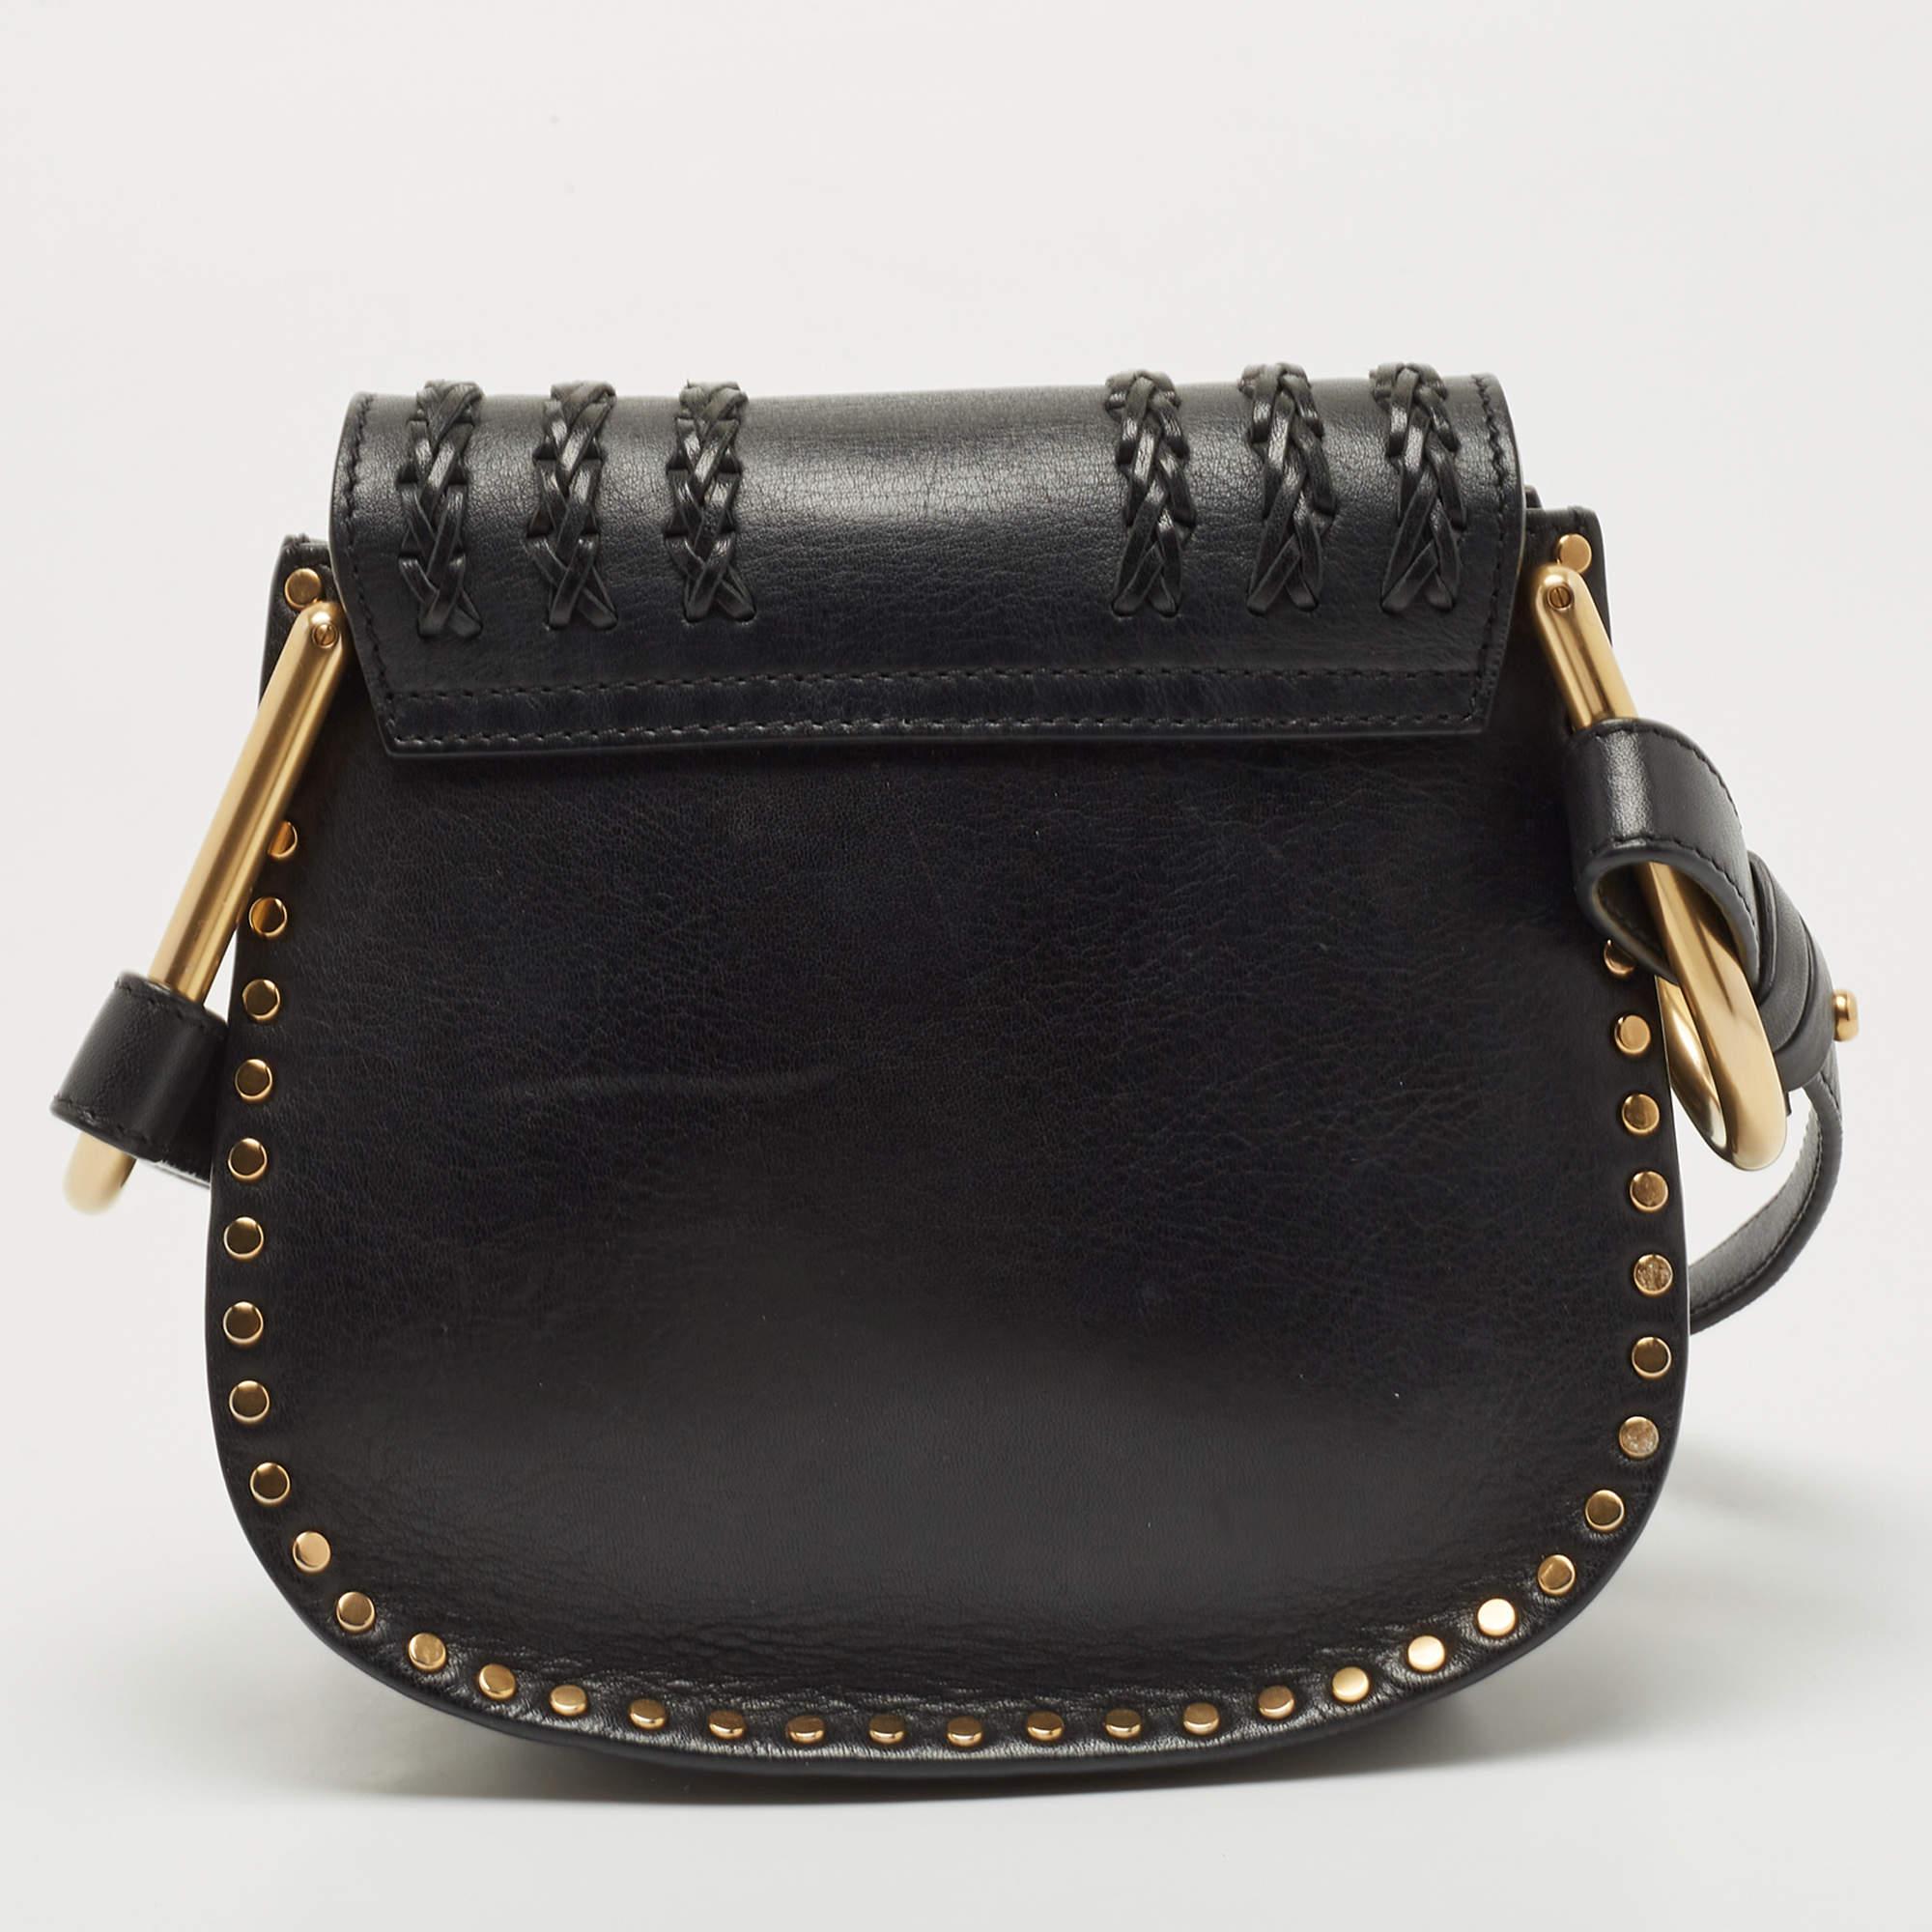 This Chloe Hudson bag exudes a fun, Boho-chic vibe making it perfect for those day outings with friends. It features a black leather exterior accented with braid and stitch detailing. It features a playful tassel, gold-tone studs along the edges,